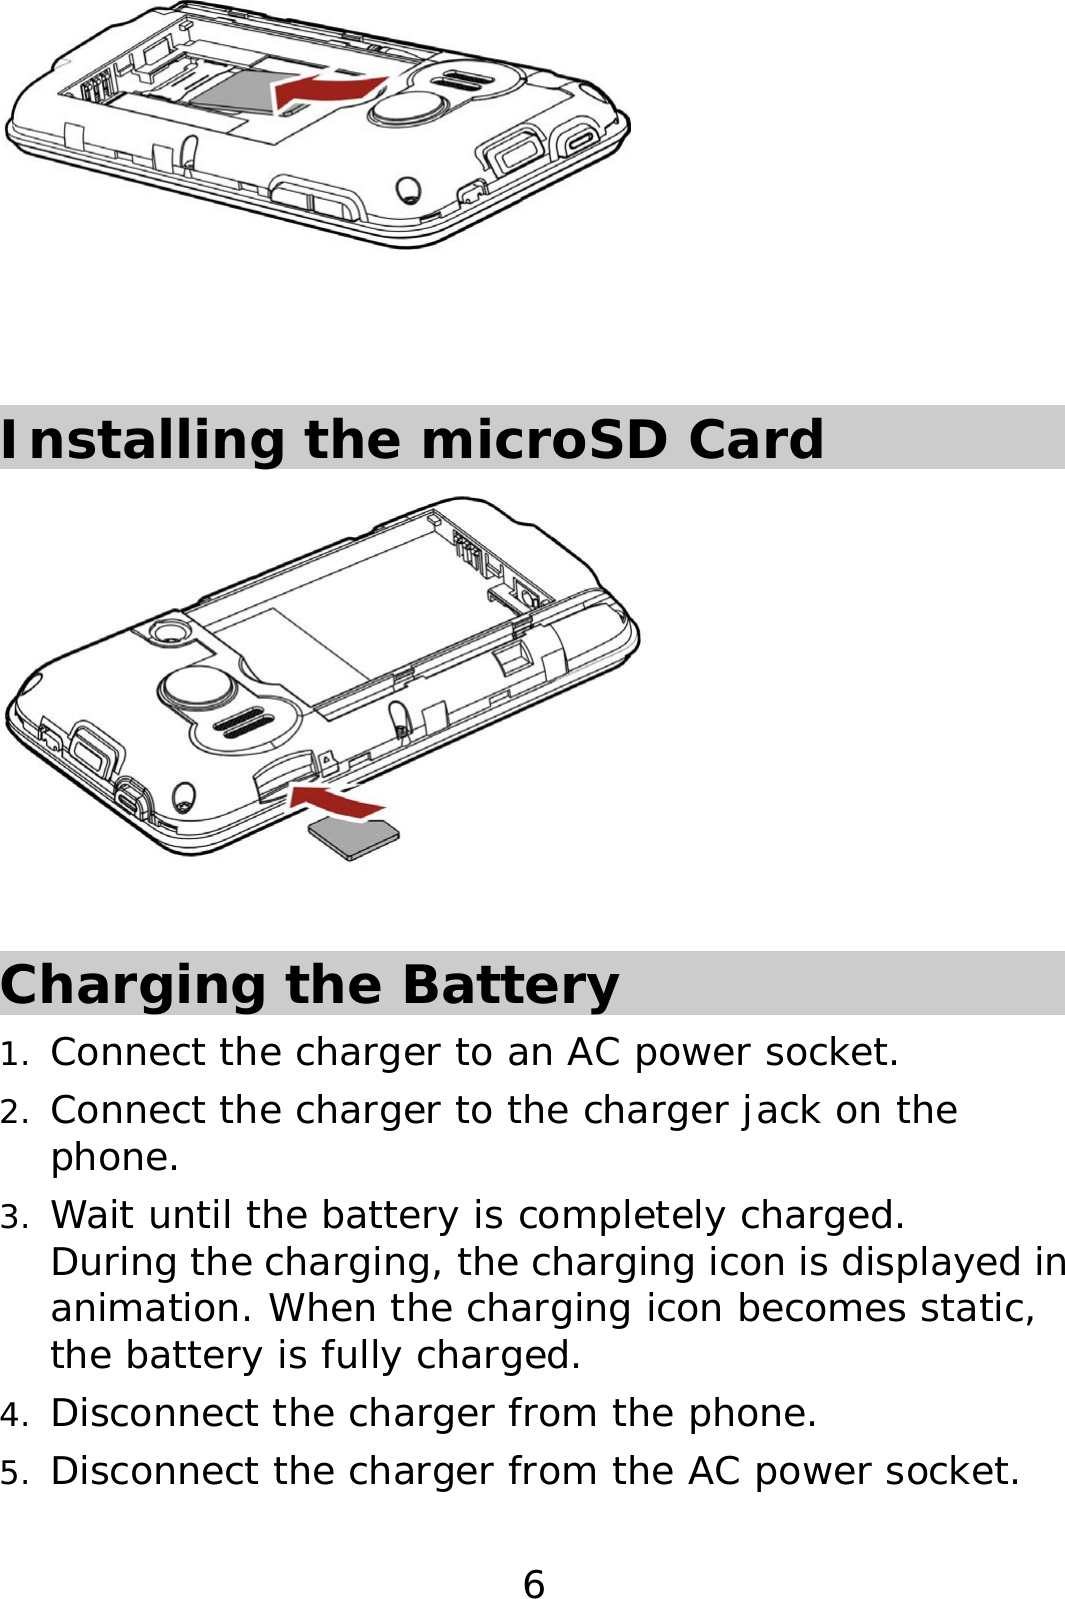 6    Installing the microSD Card   Charging the Battery 1. Connect the charger to an AC power socket. 2. Connect the charger to the charger jack on the phone. 3. Wait until the battery is completely charged.  During the charging, the charging icon is displayed in animation. When the charging icon becomes static, the battery is fully charged.  4. Disconnect the charger from the phone. 5. Disconnect the charger from the AC power socket. 